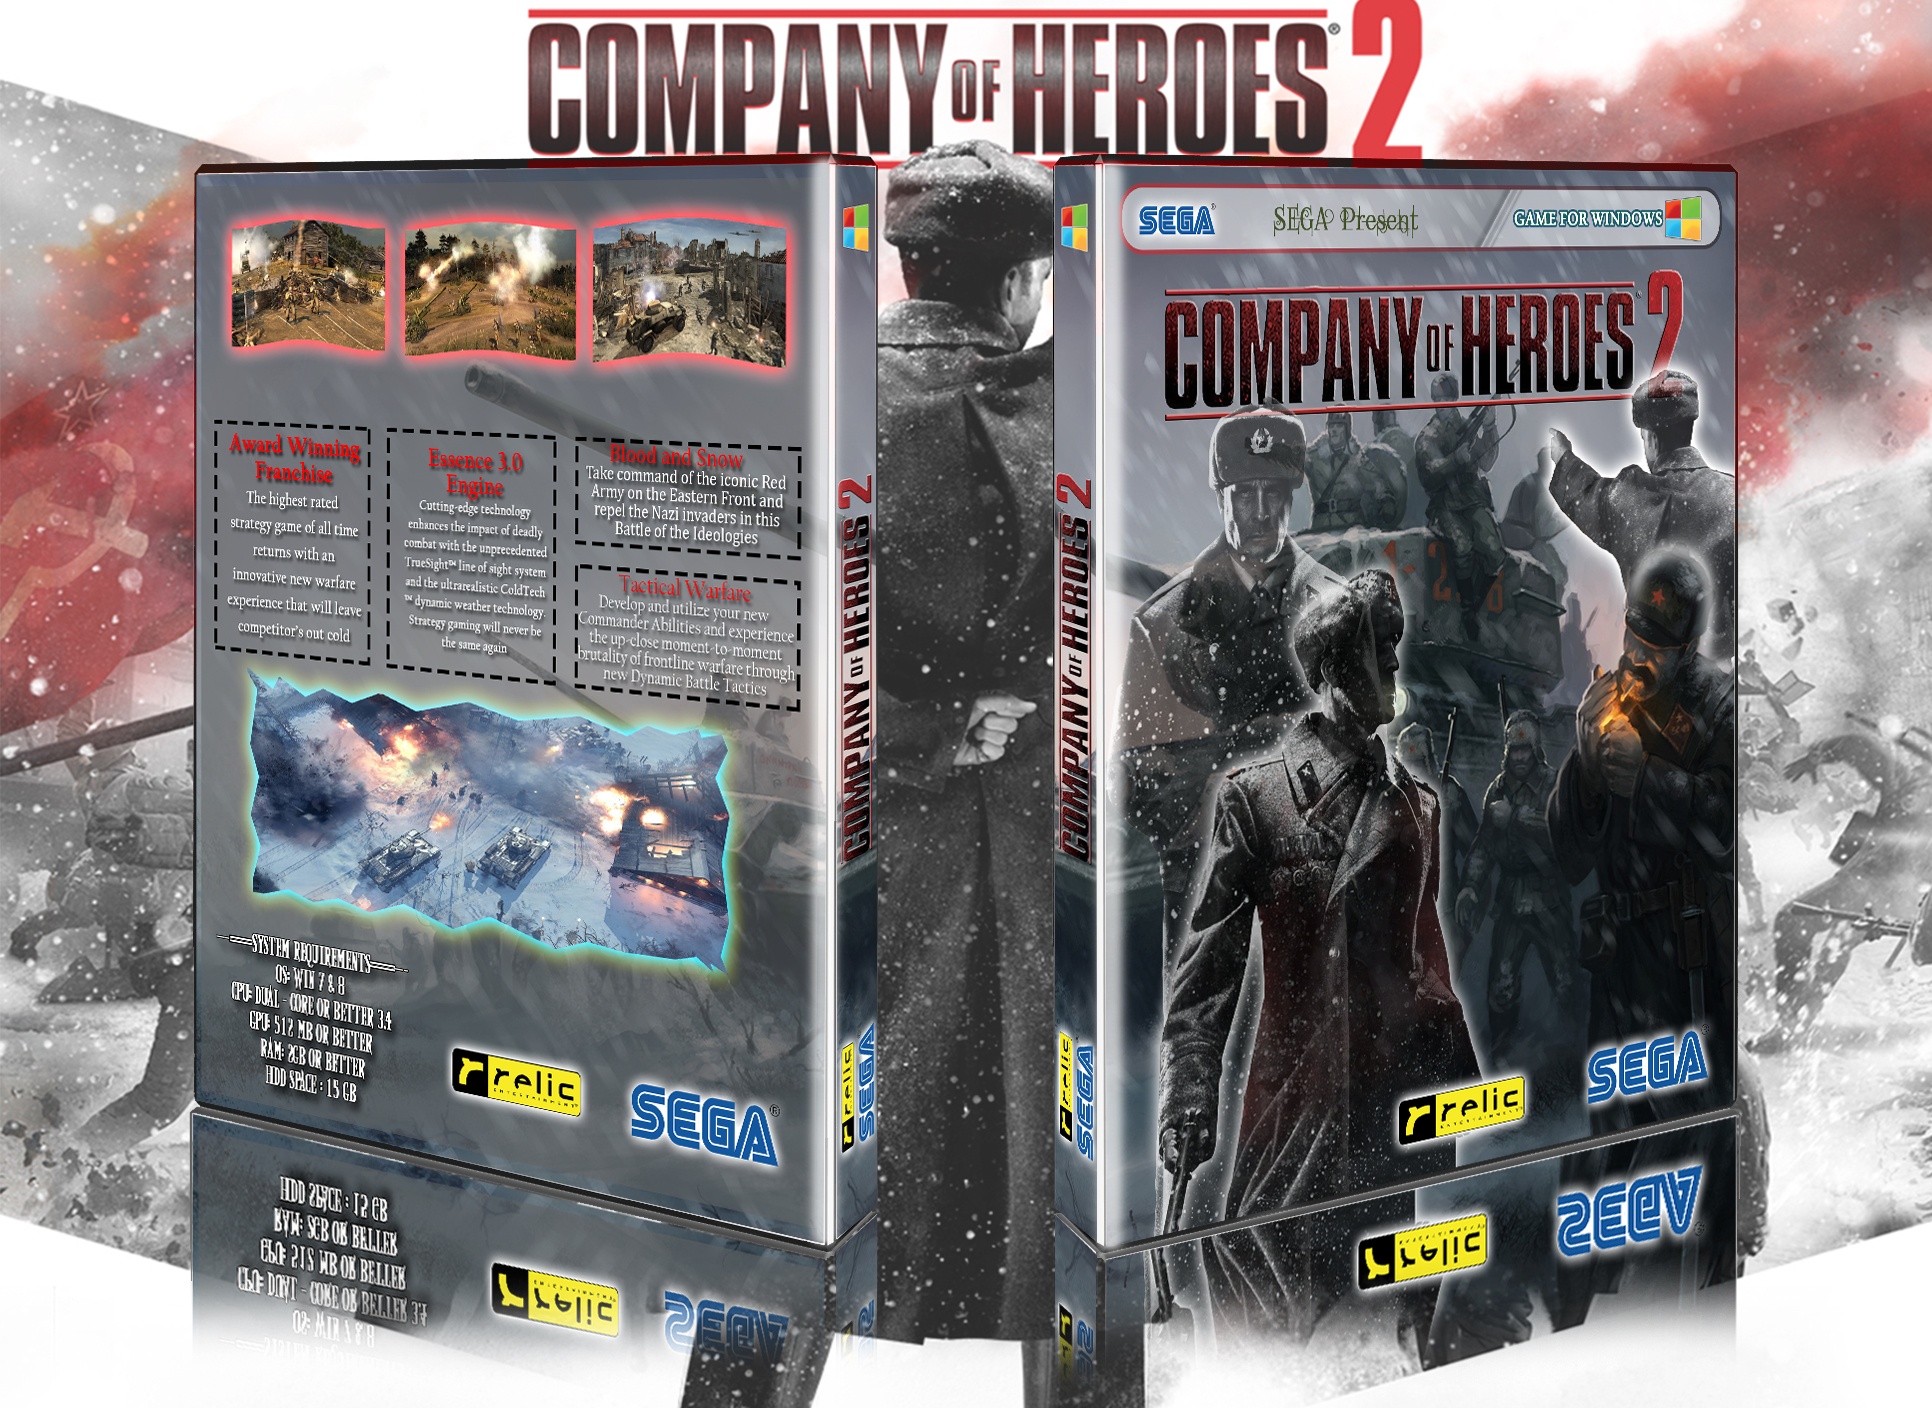 Company of Heroes 2 box cover